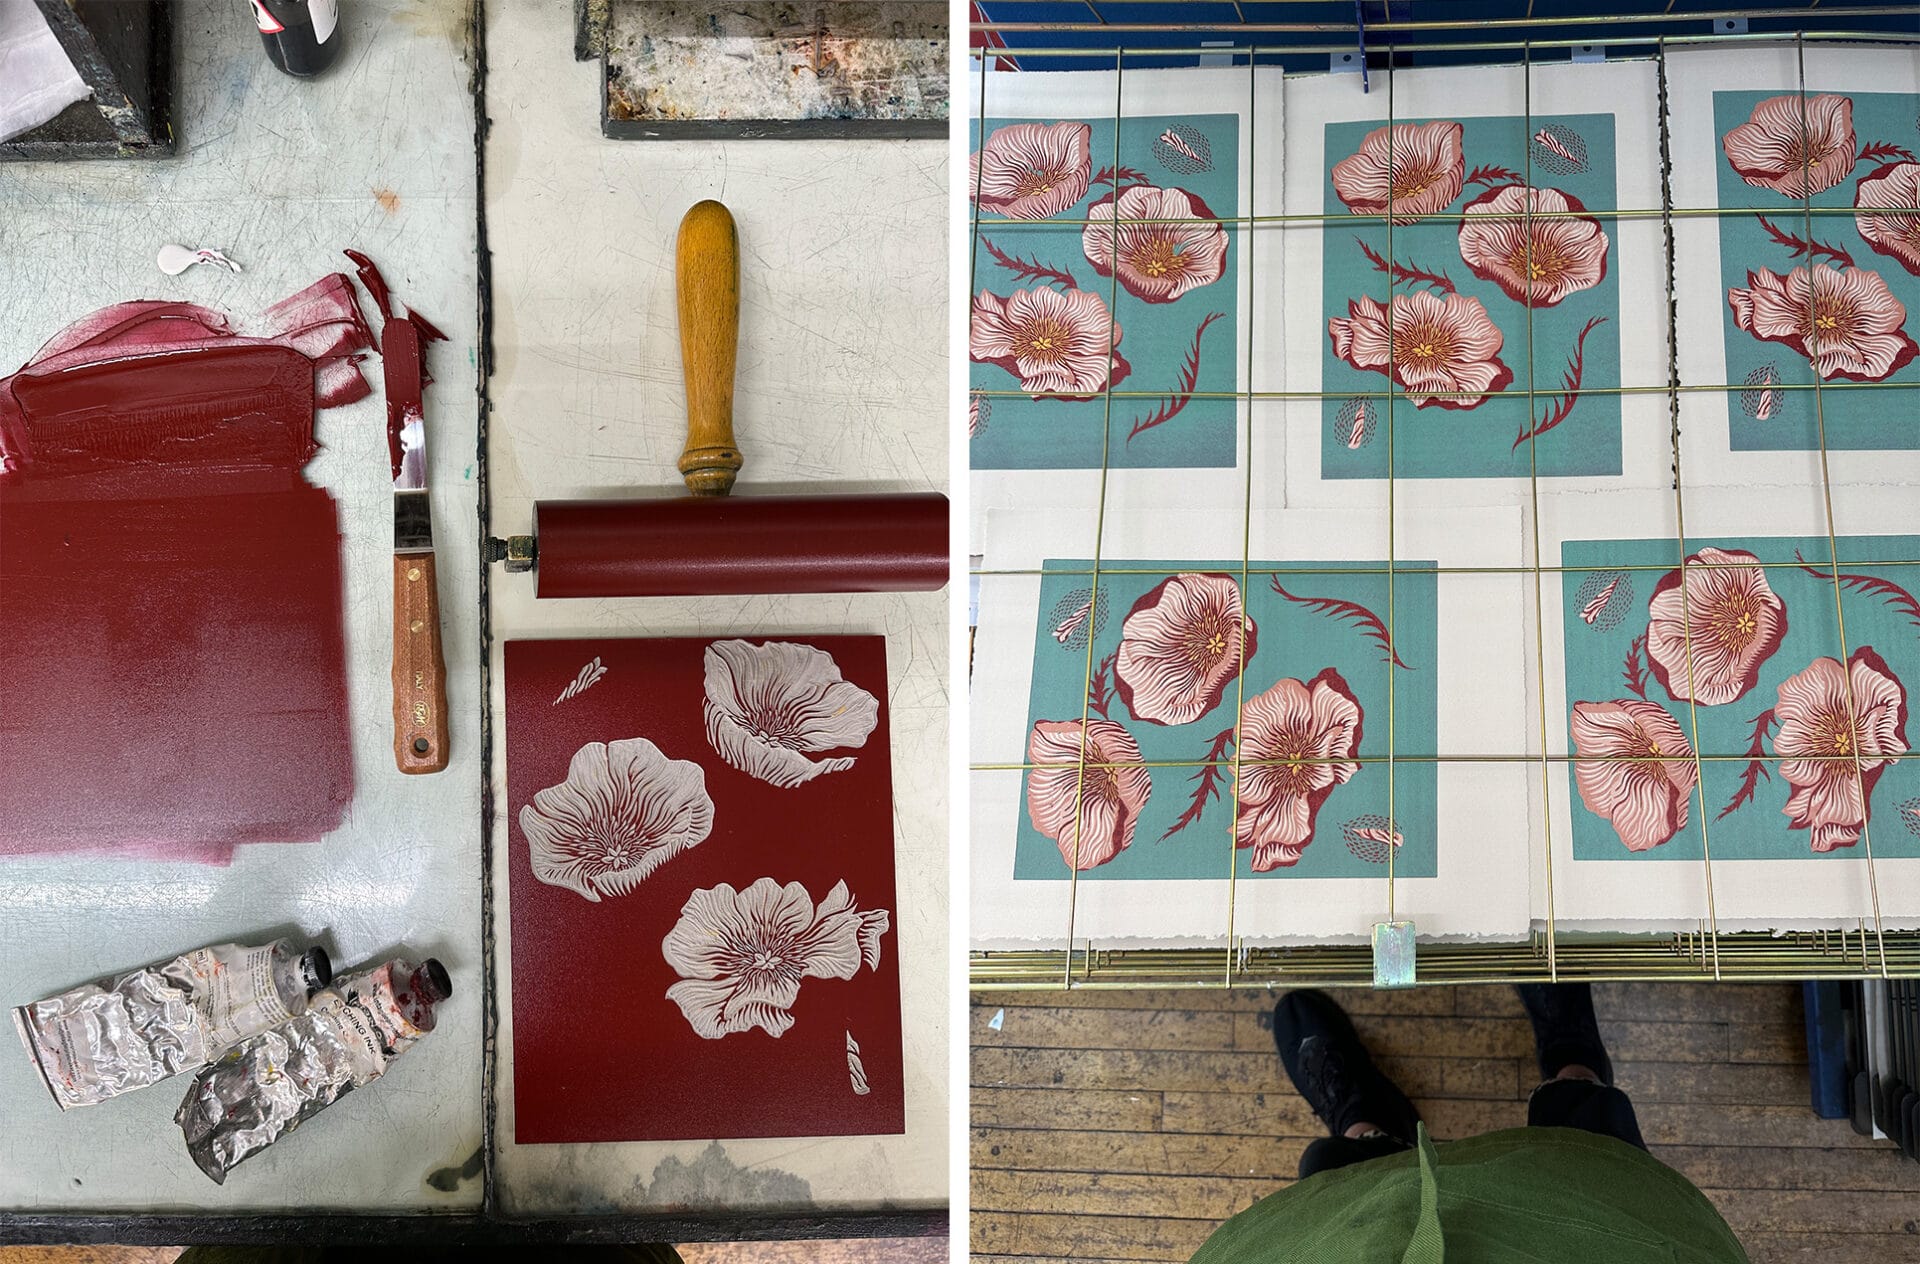 Two images side-by-side showing the process of making a linocut print. On the left, red ink is rolled over a piece of lino. On the right, prints dry on a rack.